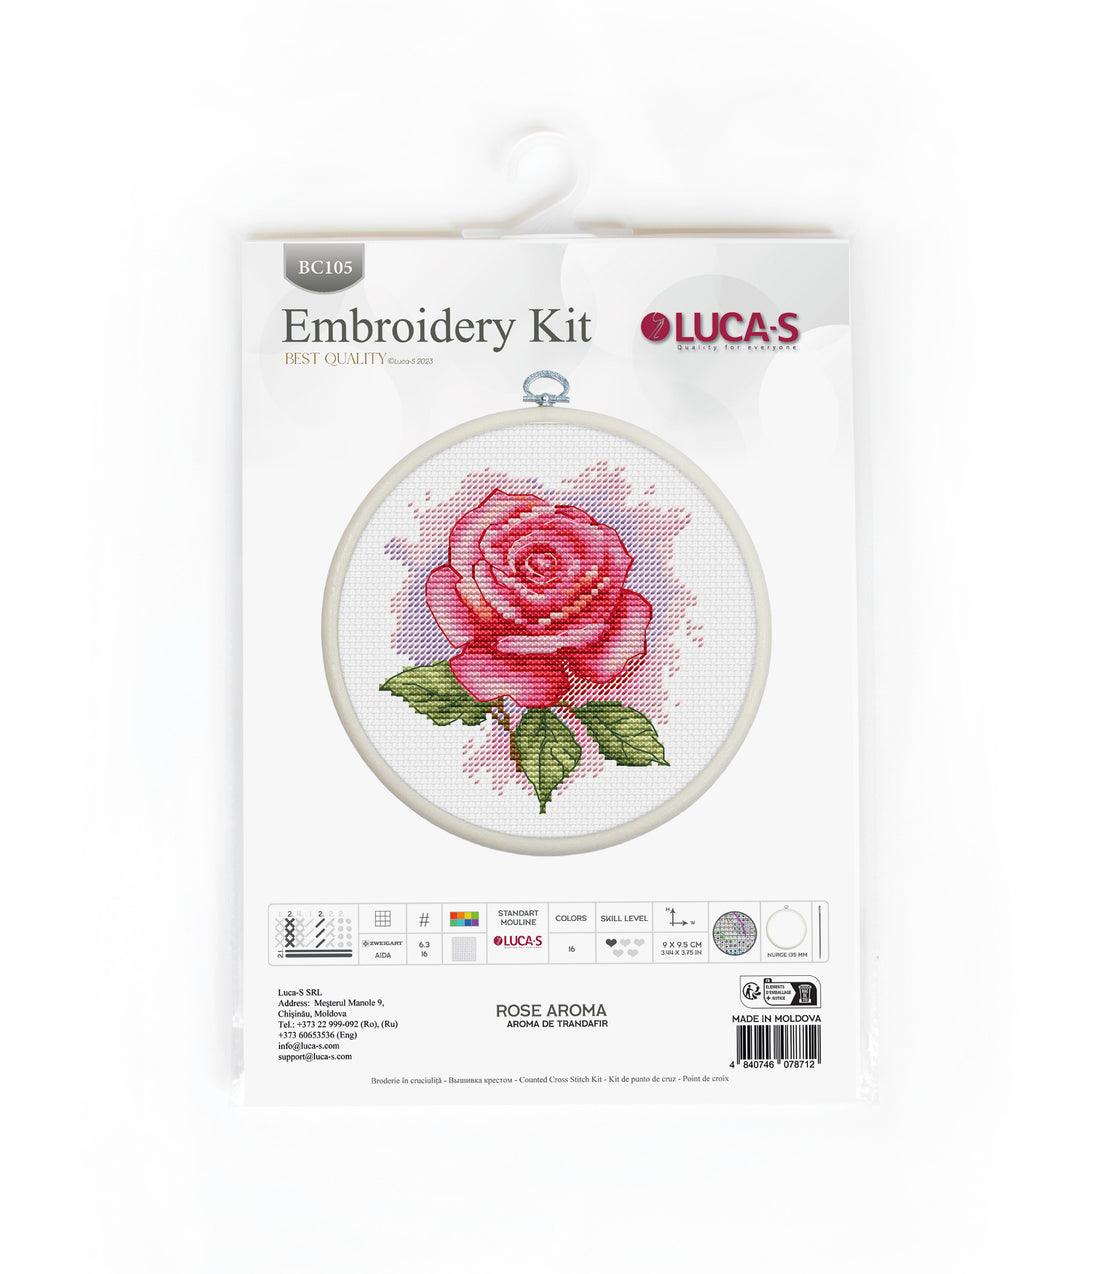 Cross Stitch Kit with Hoop Included Luca-S - Rose Aroma, BC105 - Luca-S Cross Stitch Kits